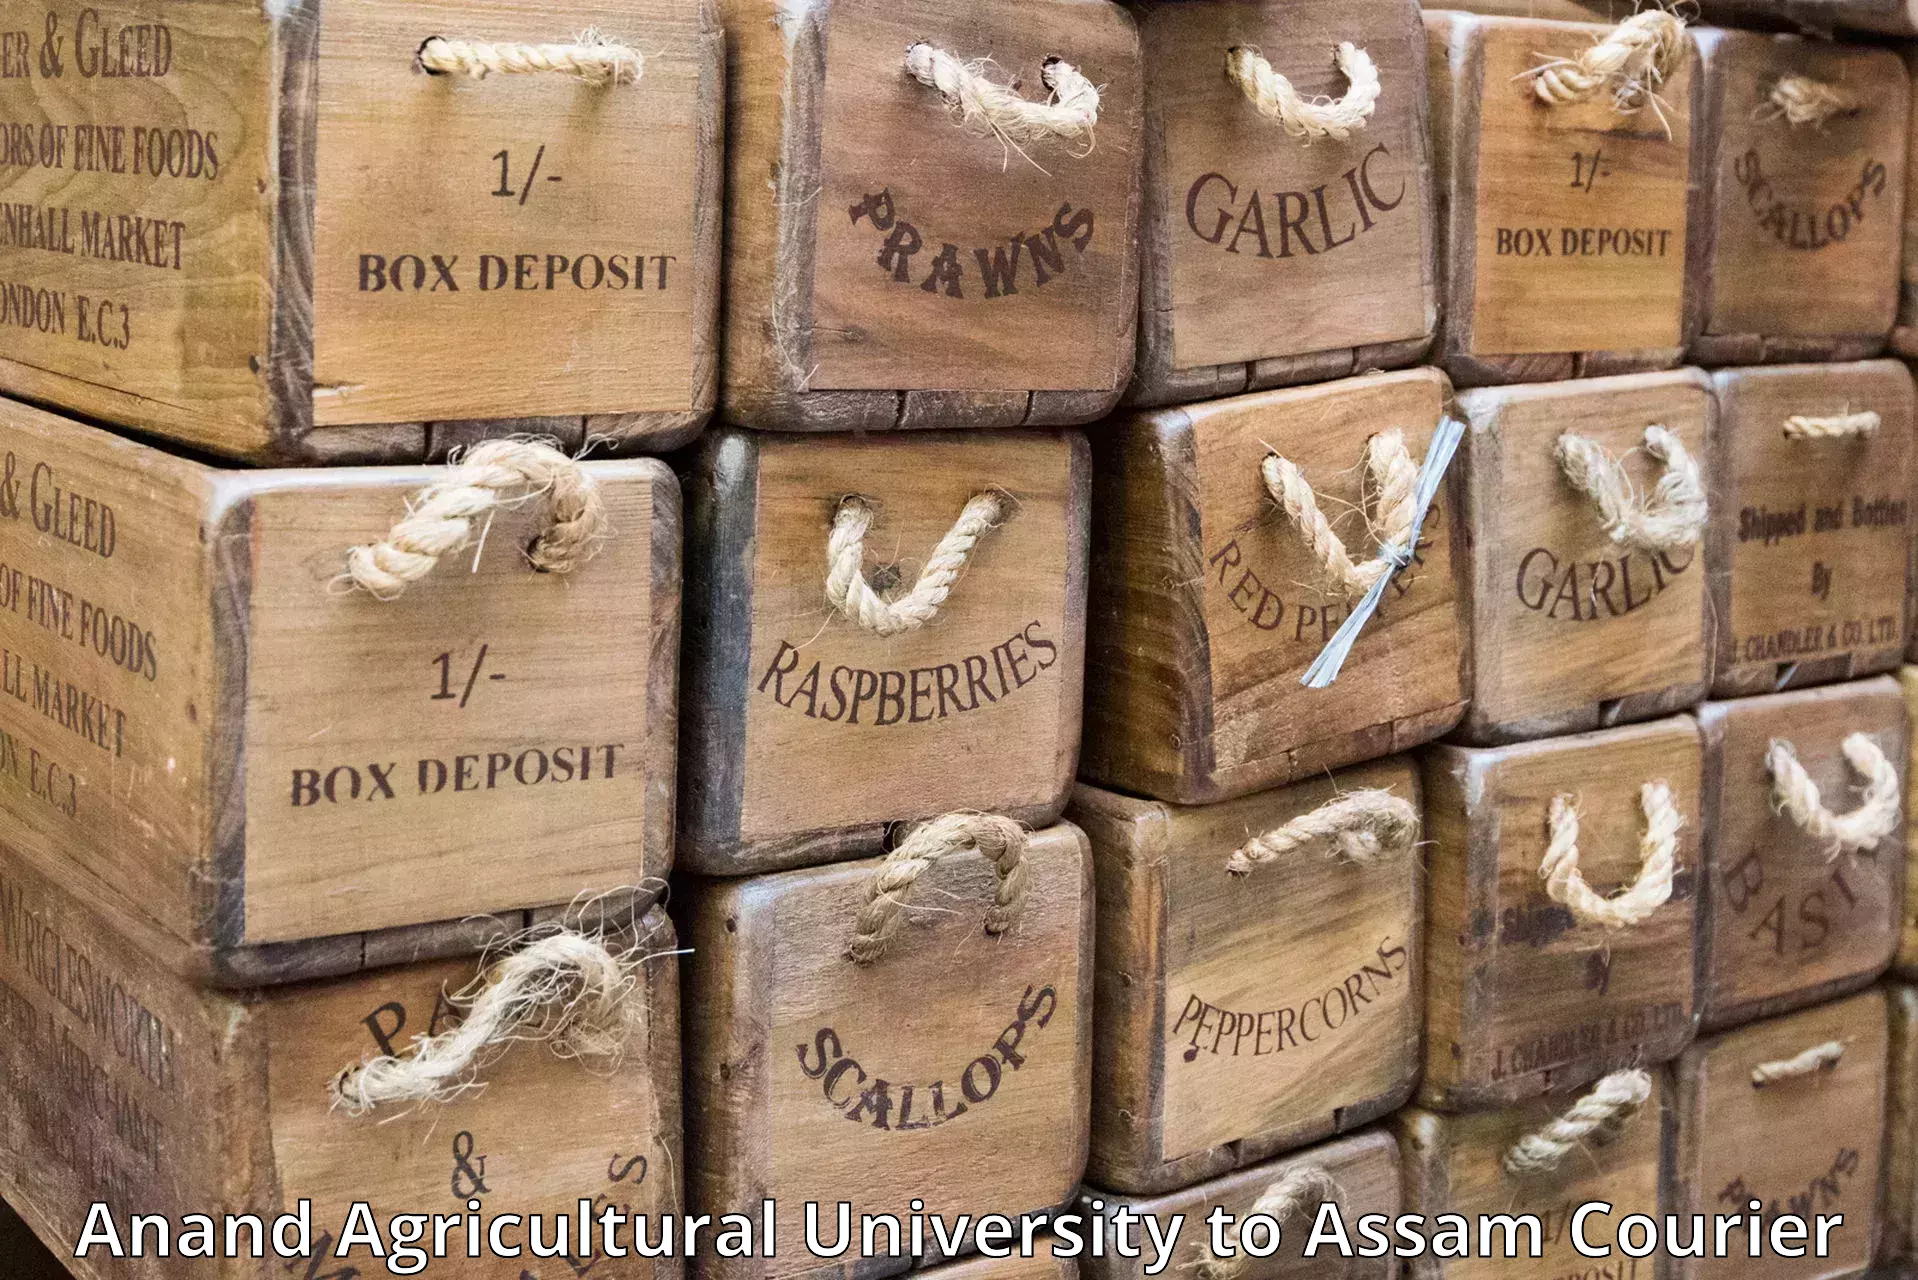 Special handling courier Anand Agricultural University to IIIT Guwahati